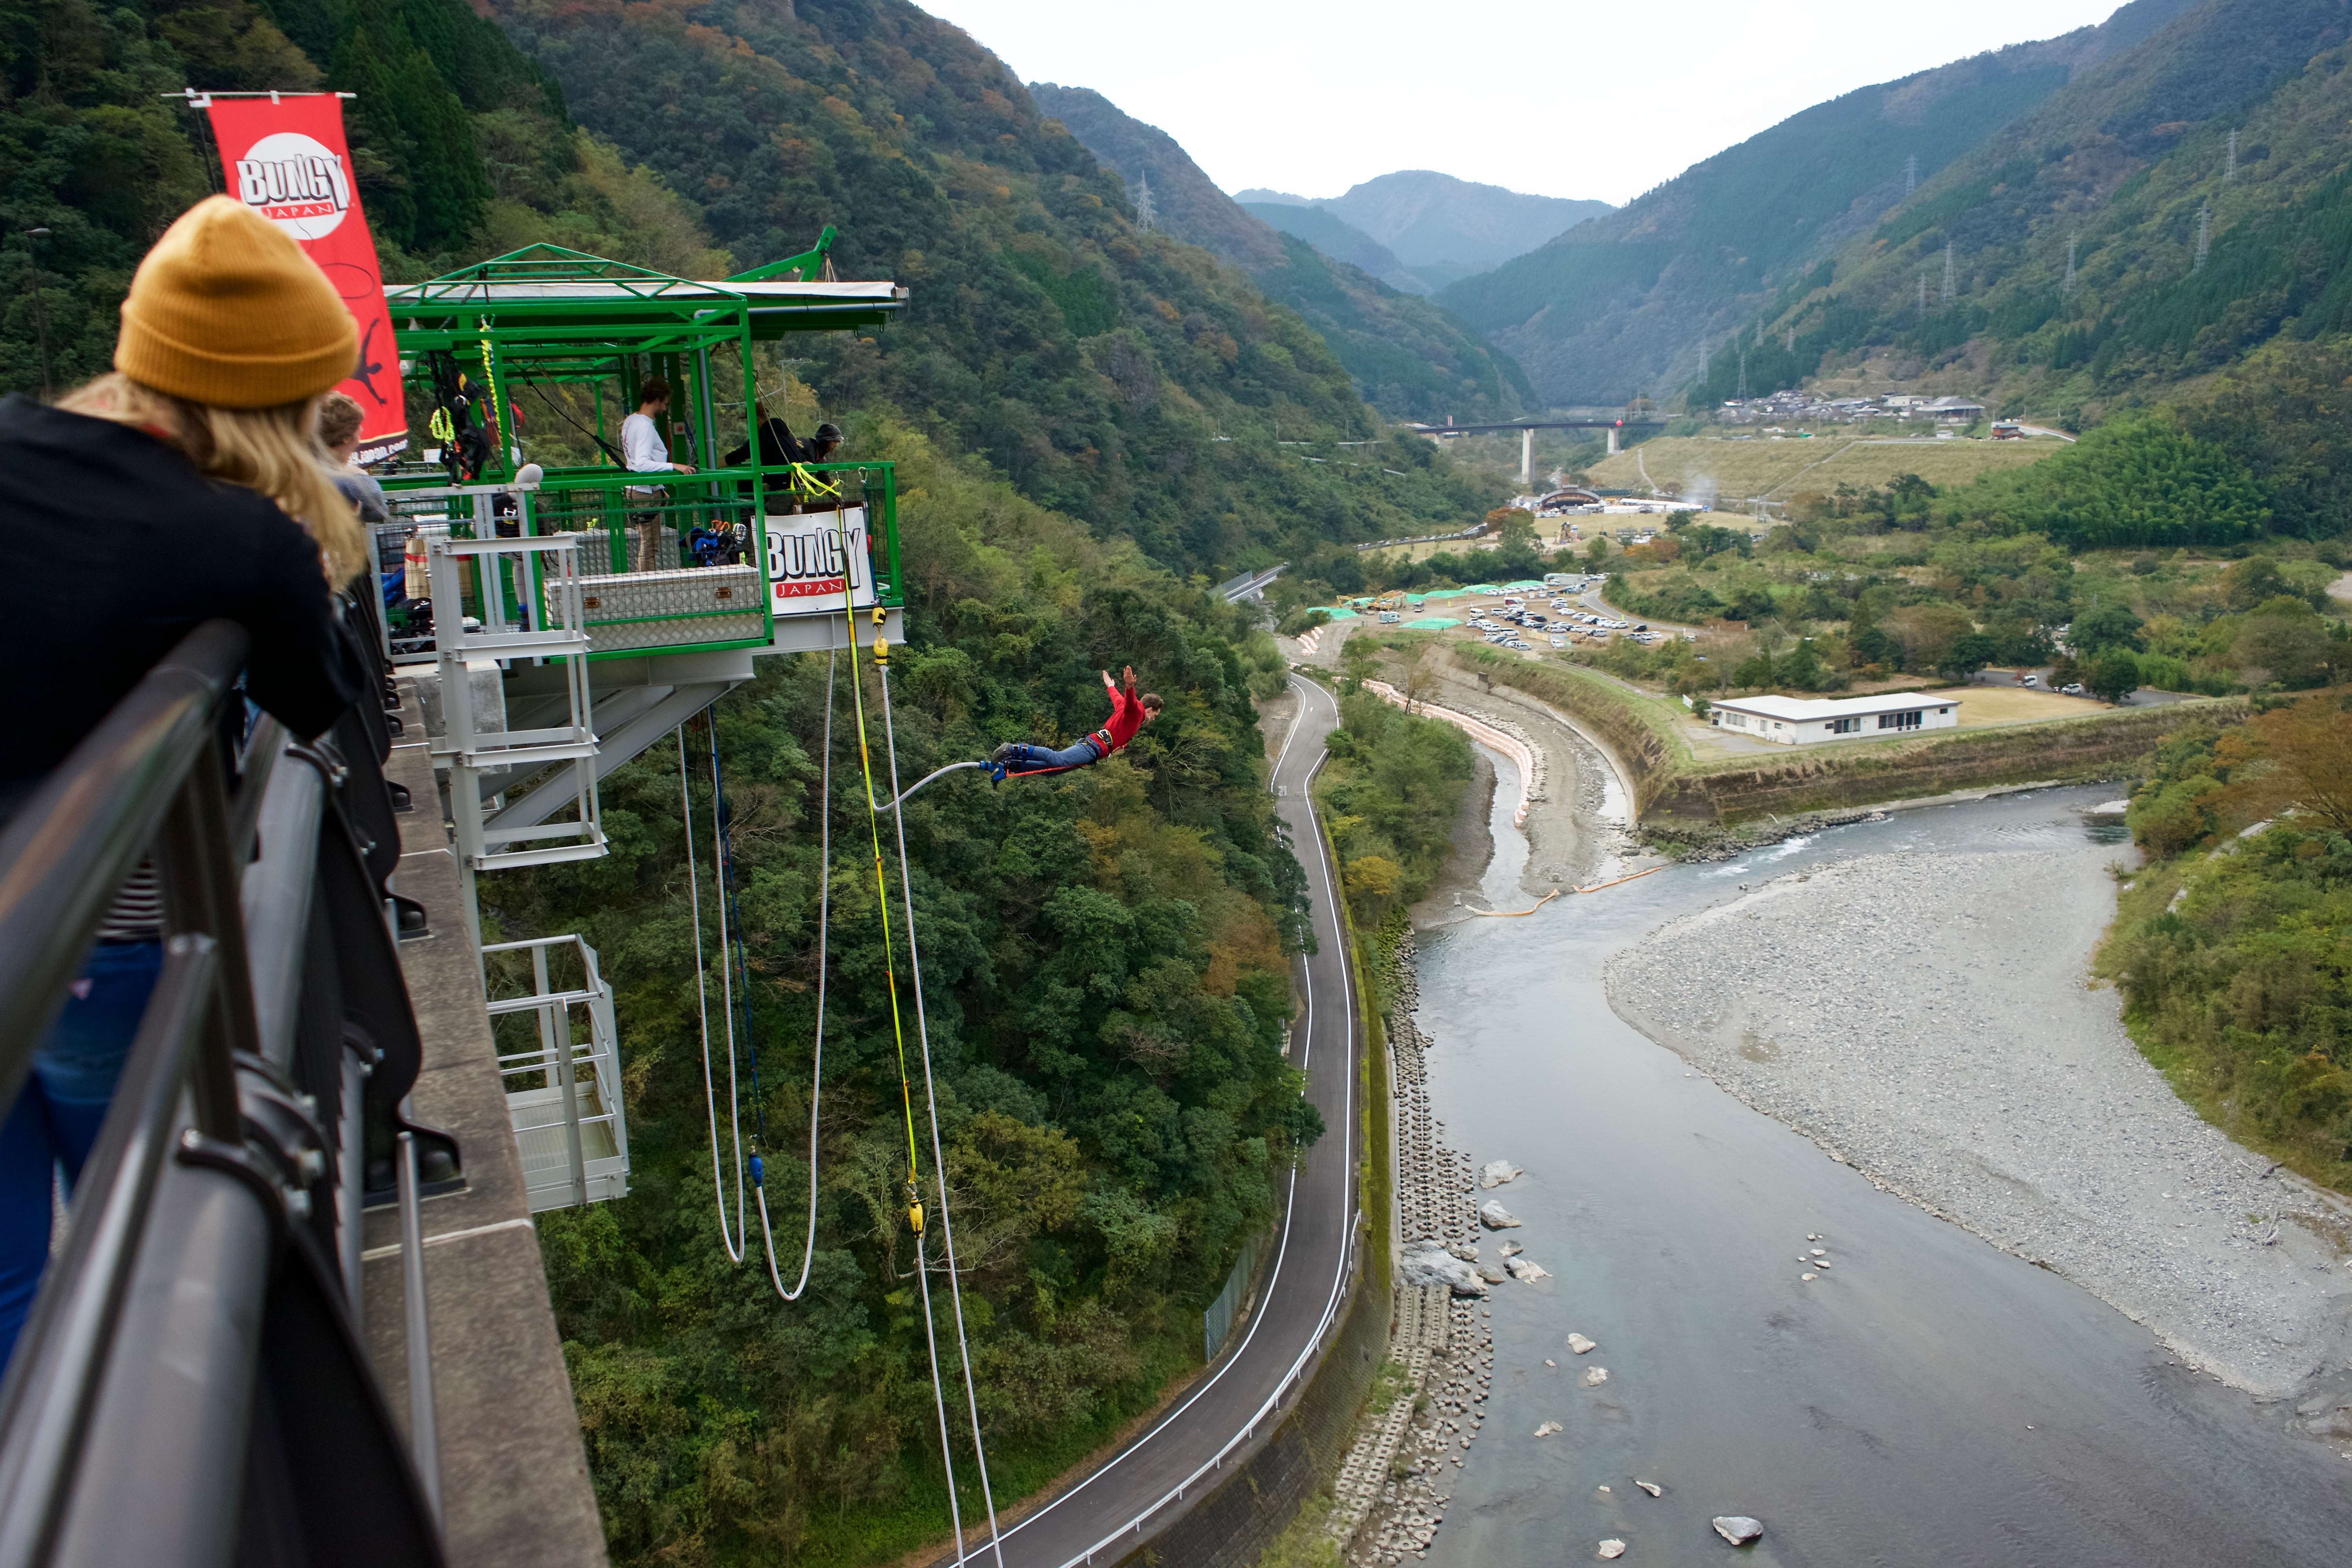 All about Bungee jumping at Ibaraki in Japan 3